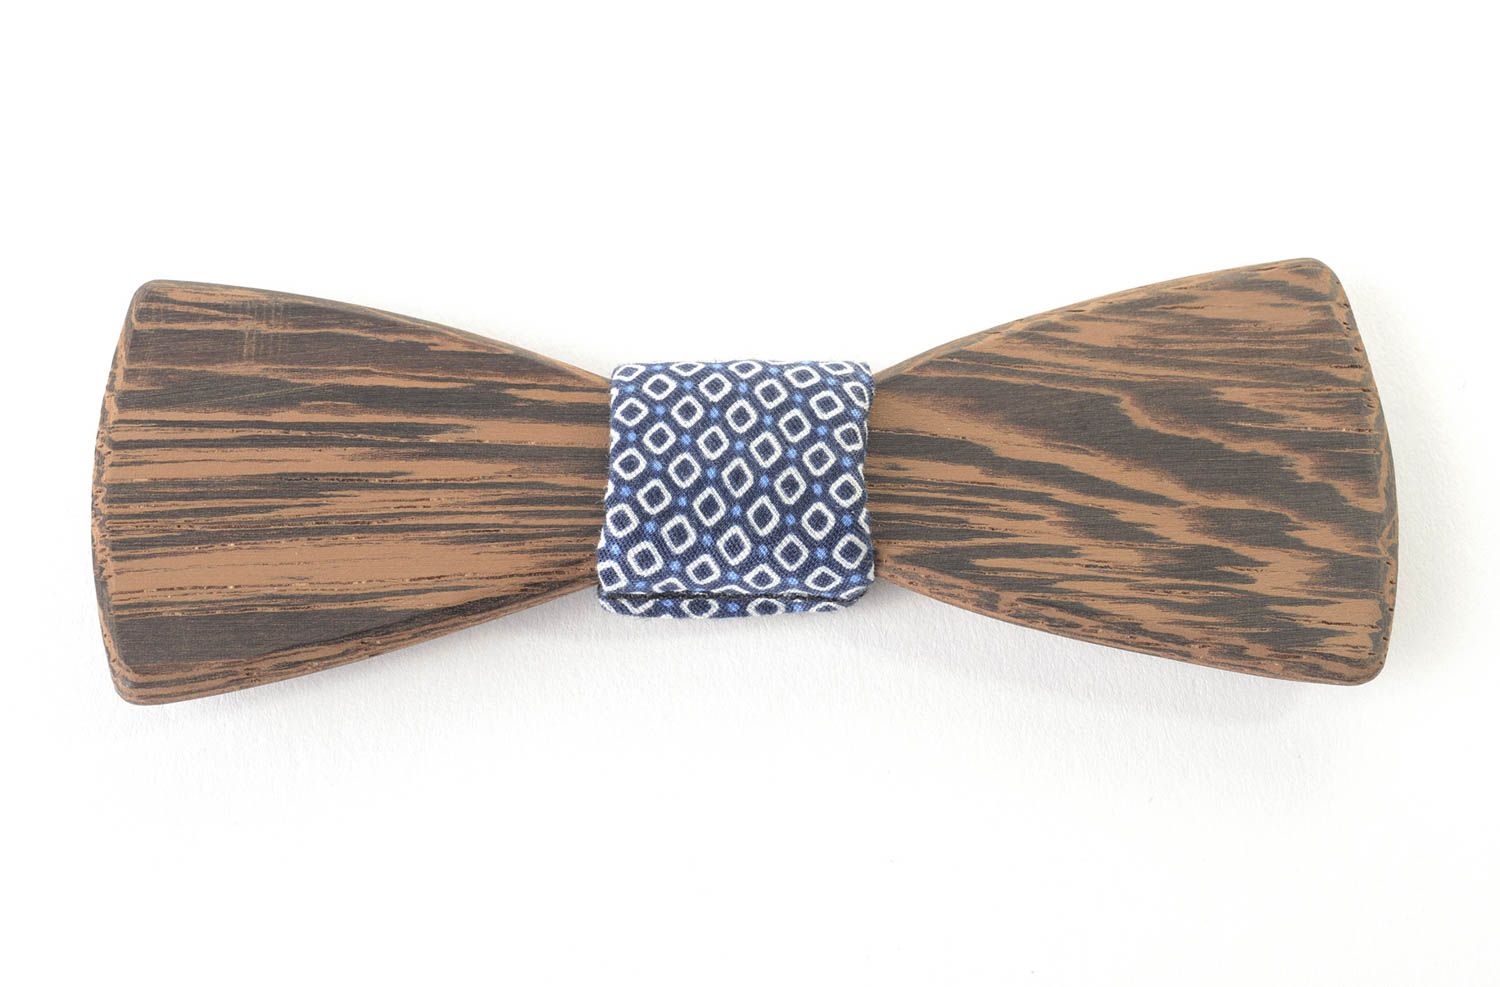 Handmade mens accessories wooden bow tie stylish bow tie gifts for men photo 4